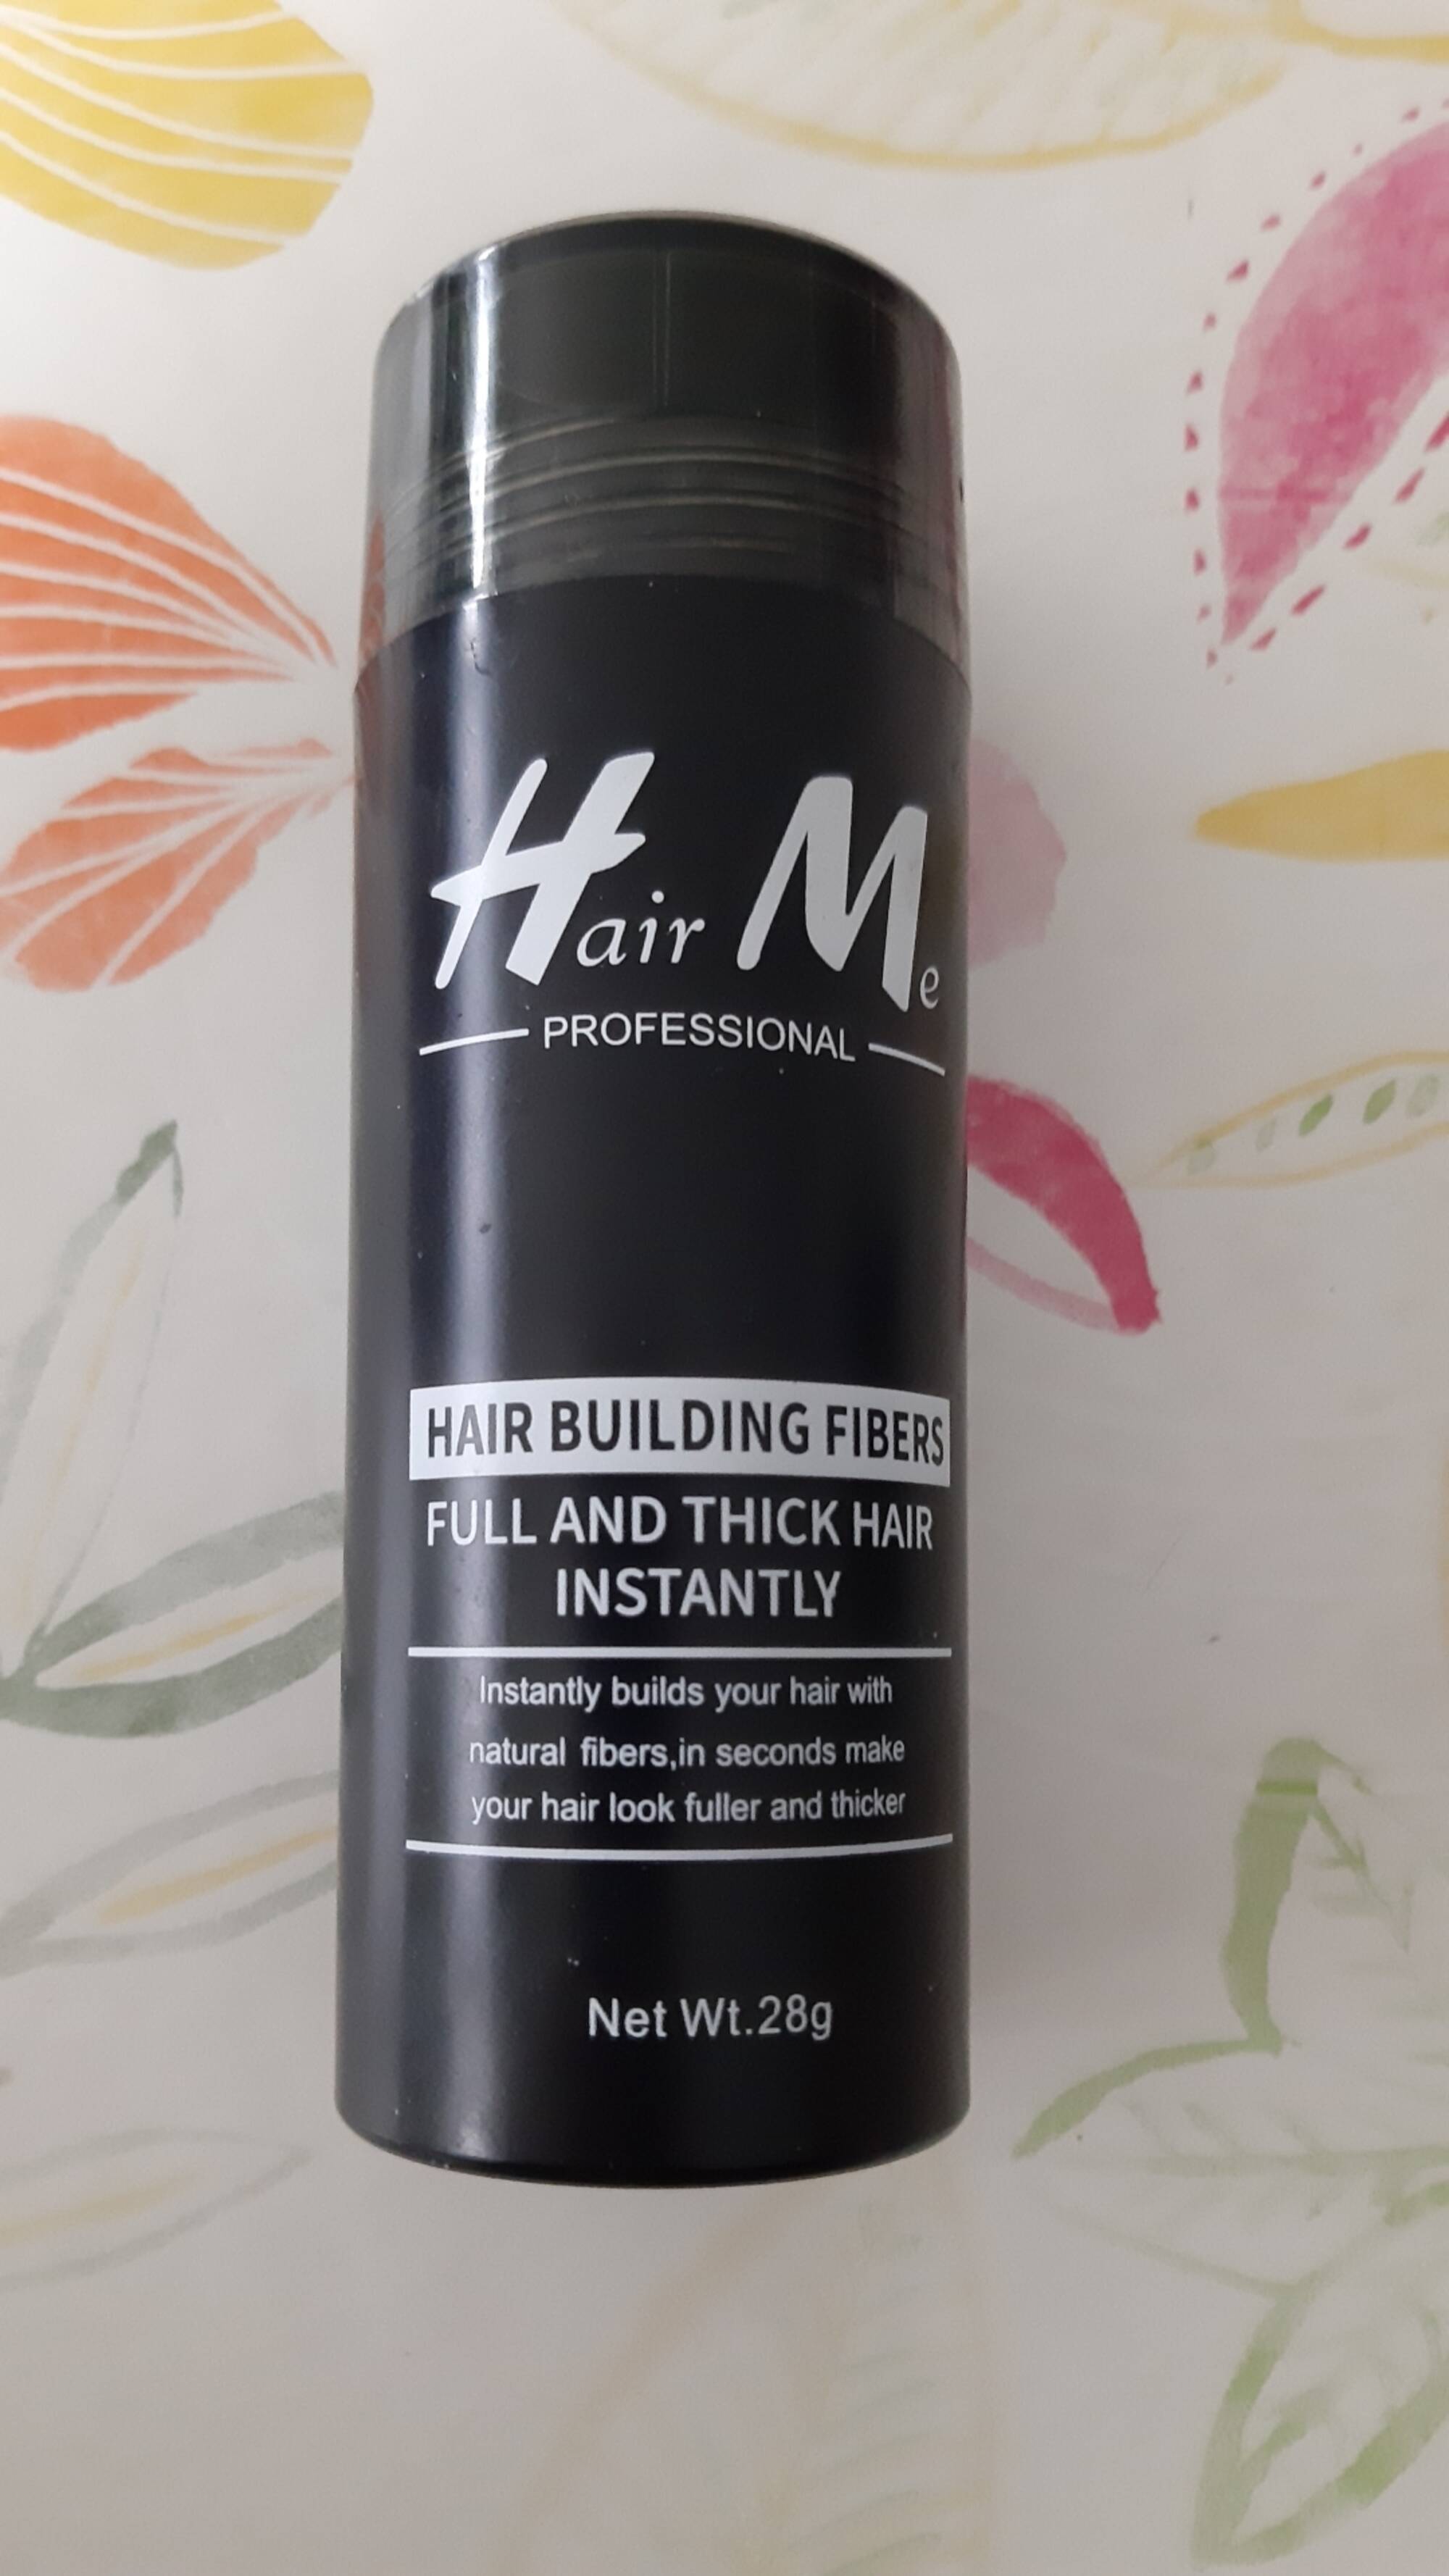 HAIR ME PROFESSIONAL - Hair building fibers full and thick hair instantly 